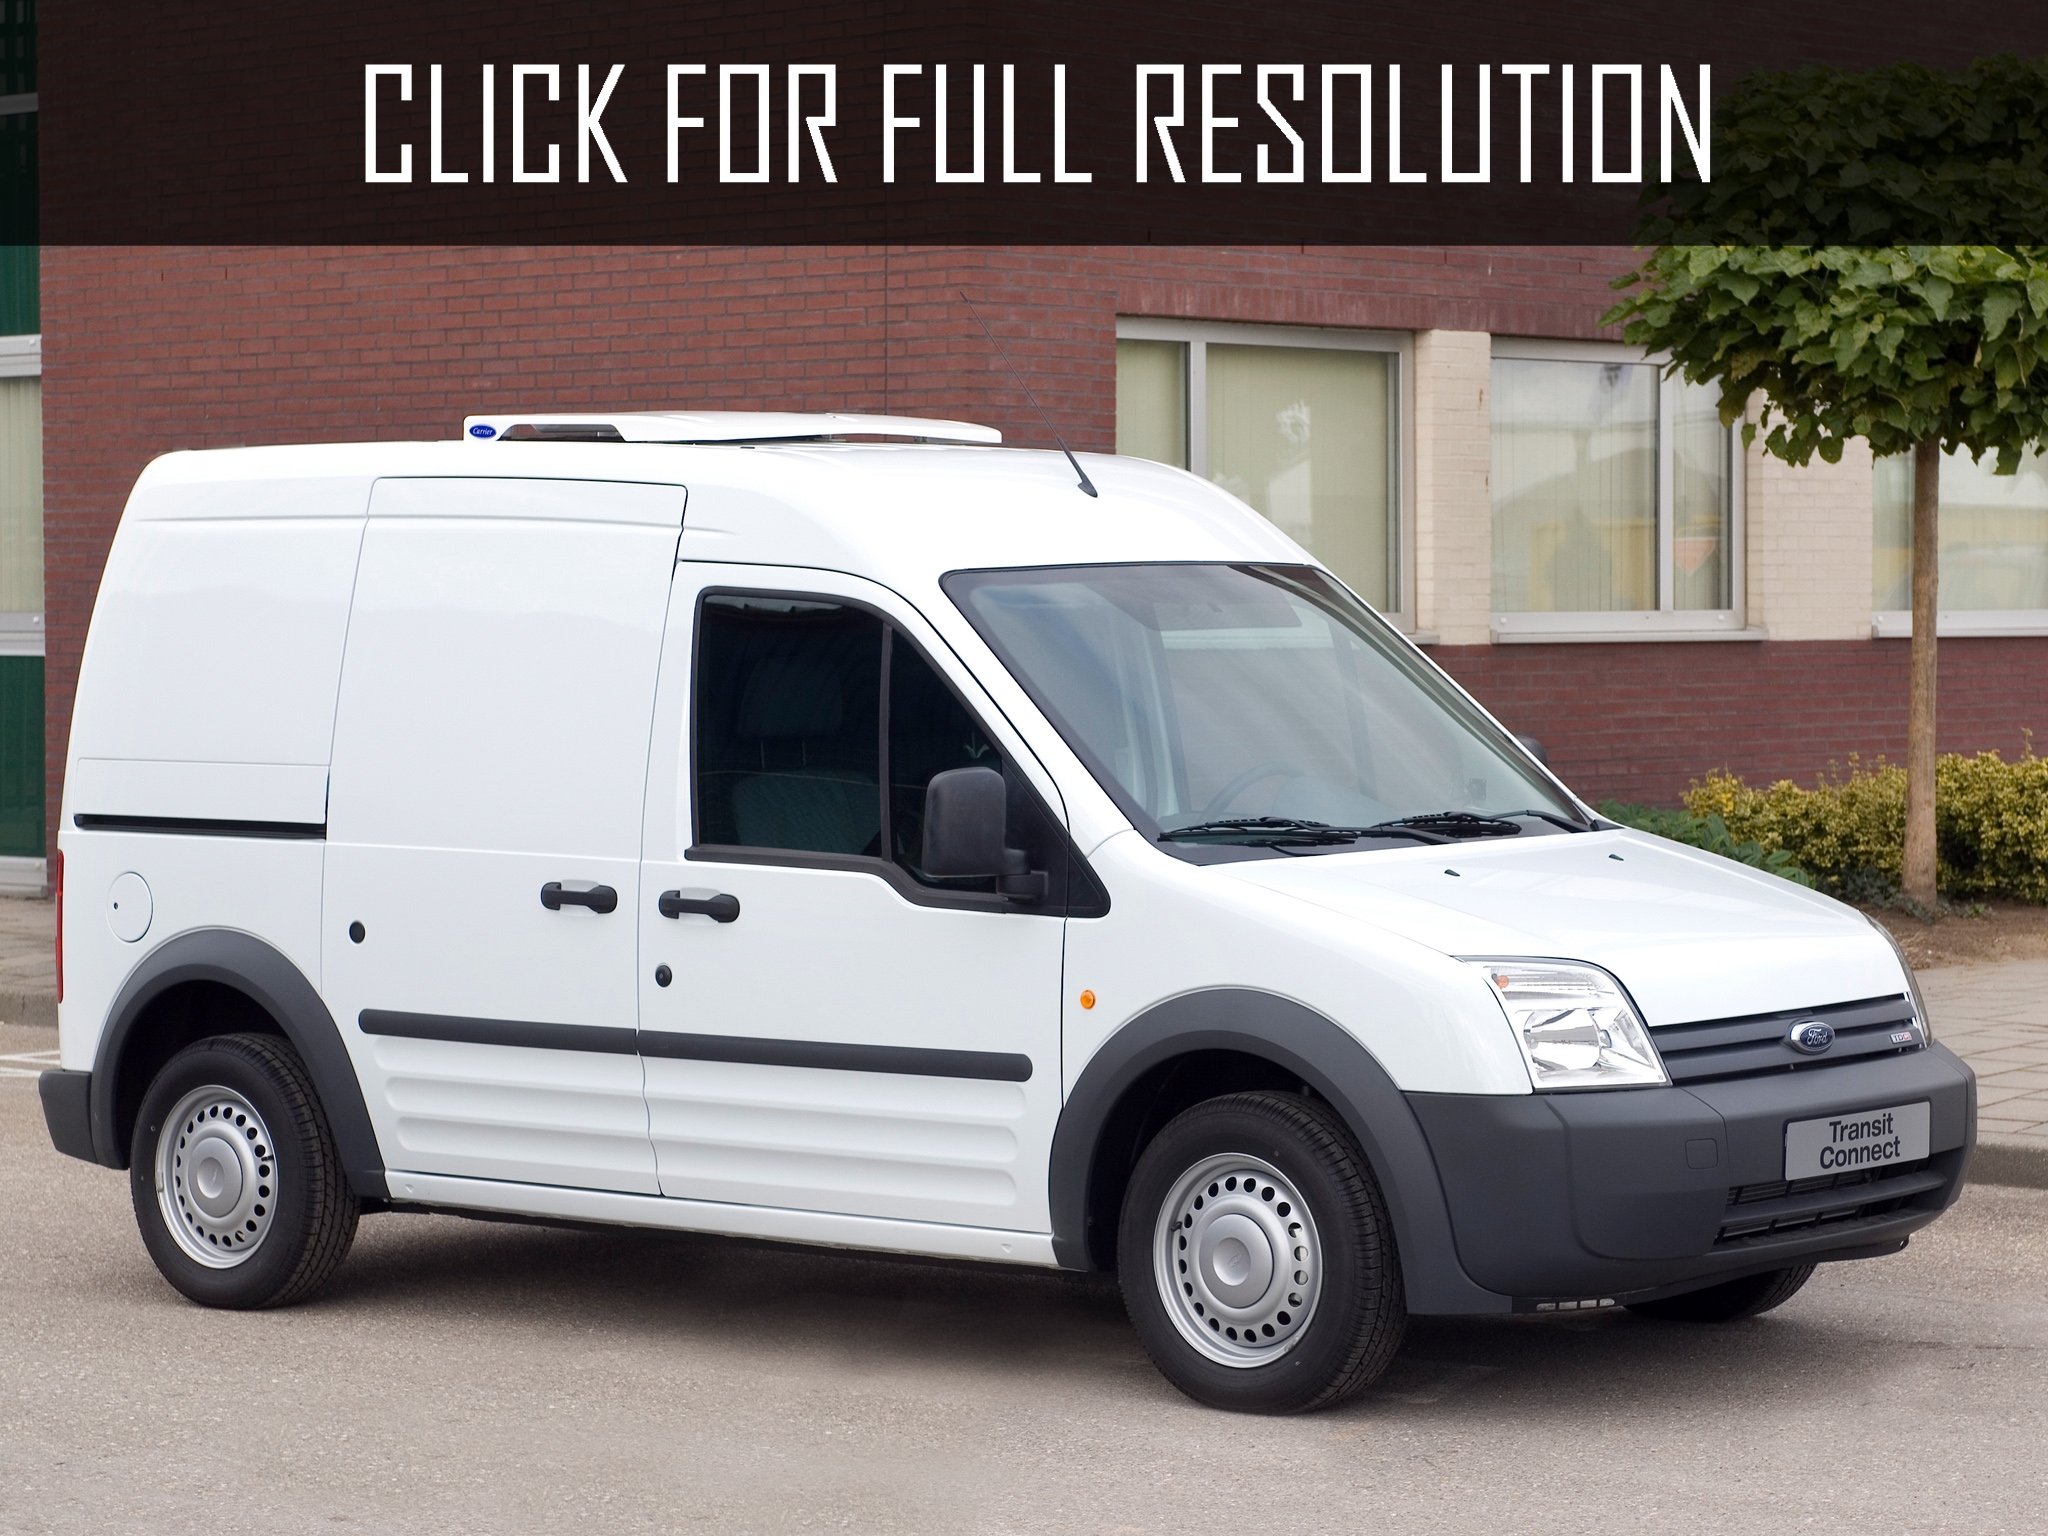 2005 Ford Transit Connect news, reviews, msrp, ratings